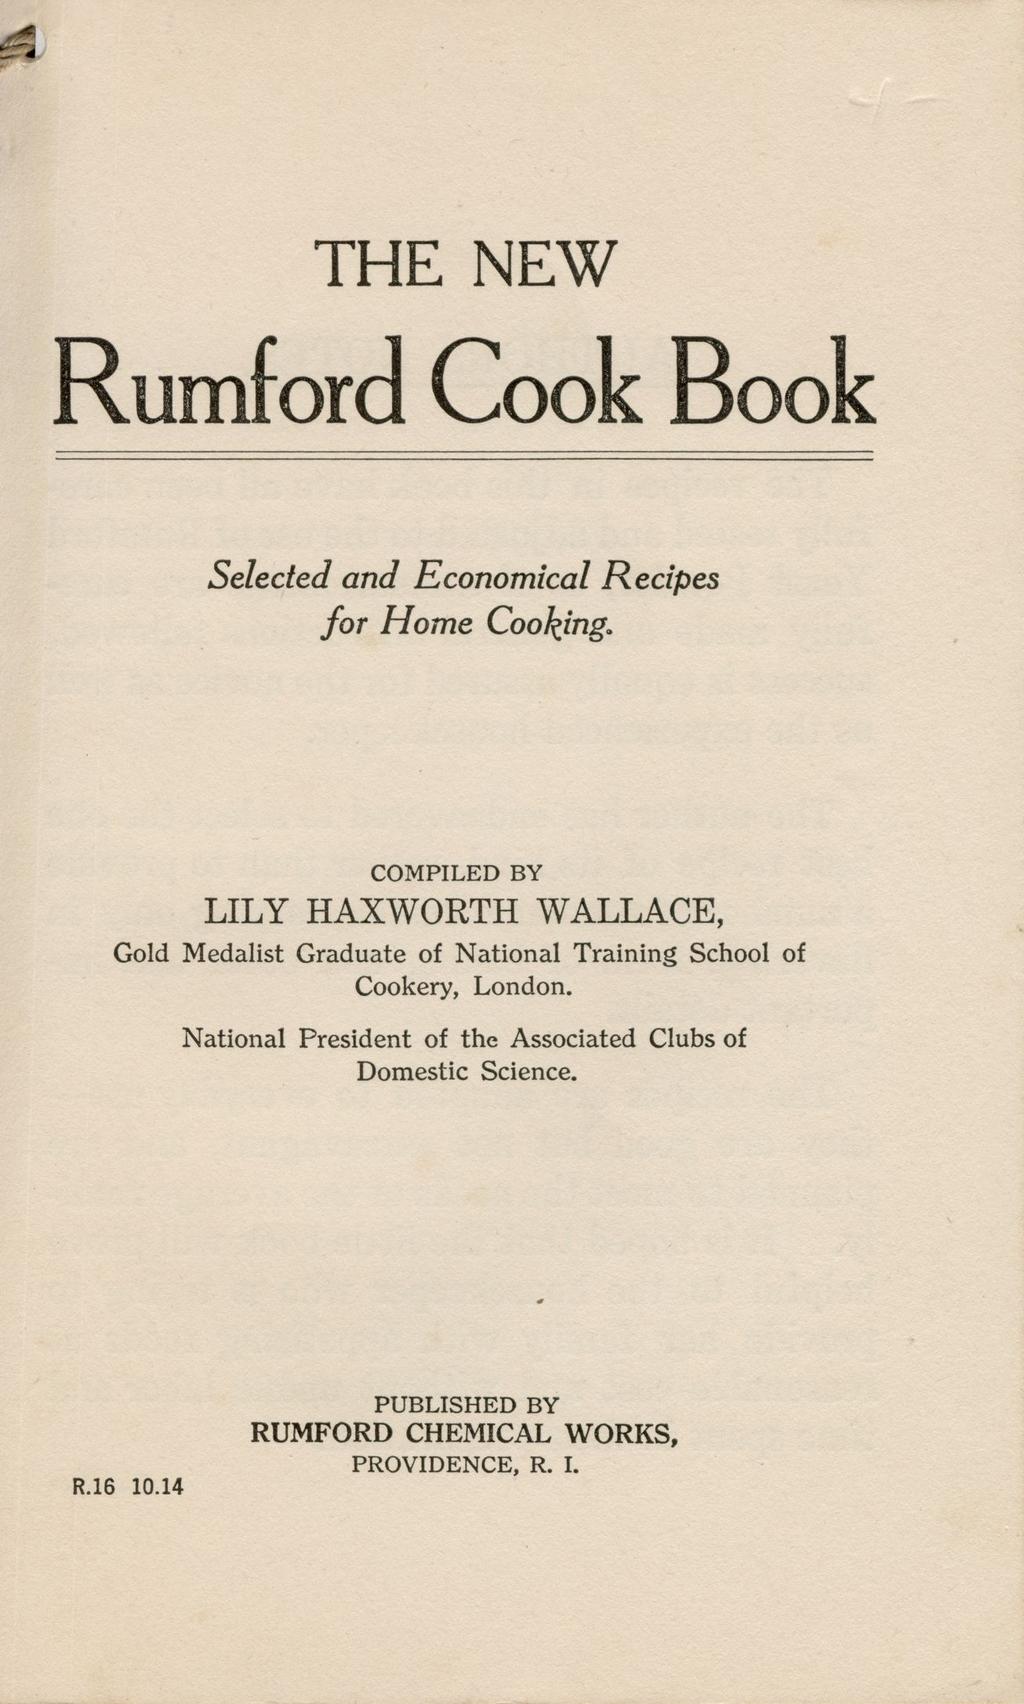 THE NEW Rumford Cook Book Selected and Economical Recipes for Home Cooking.